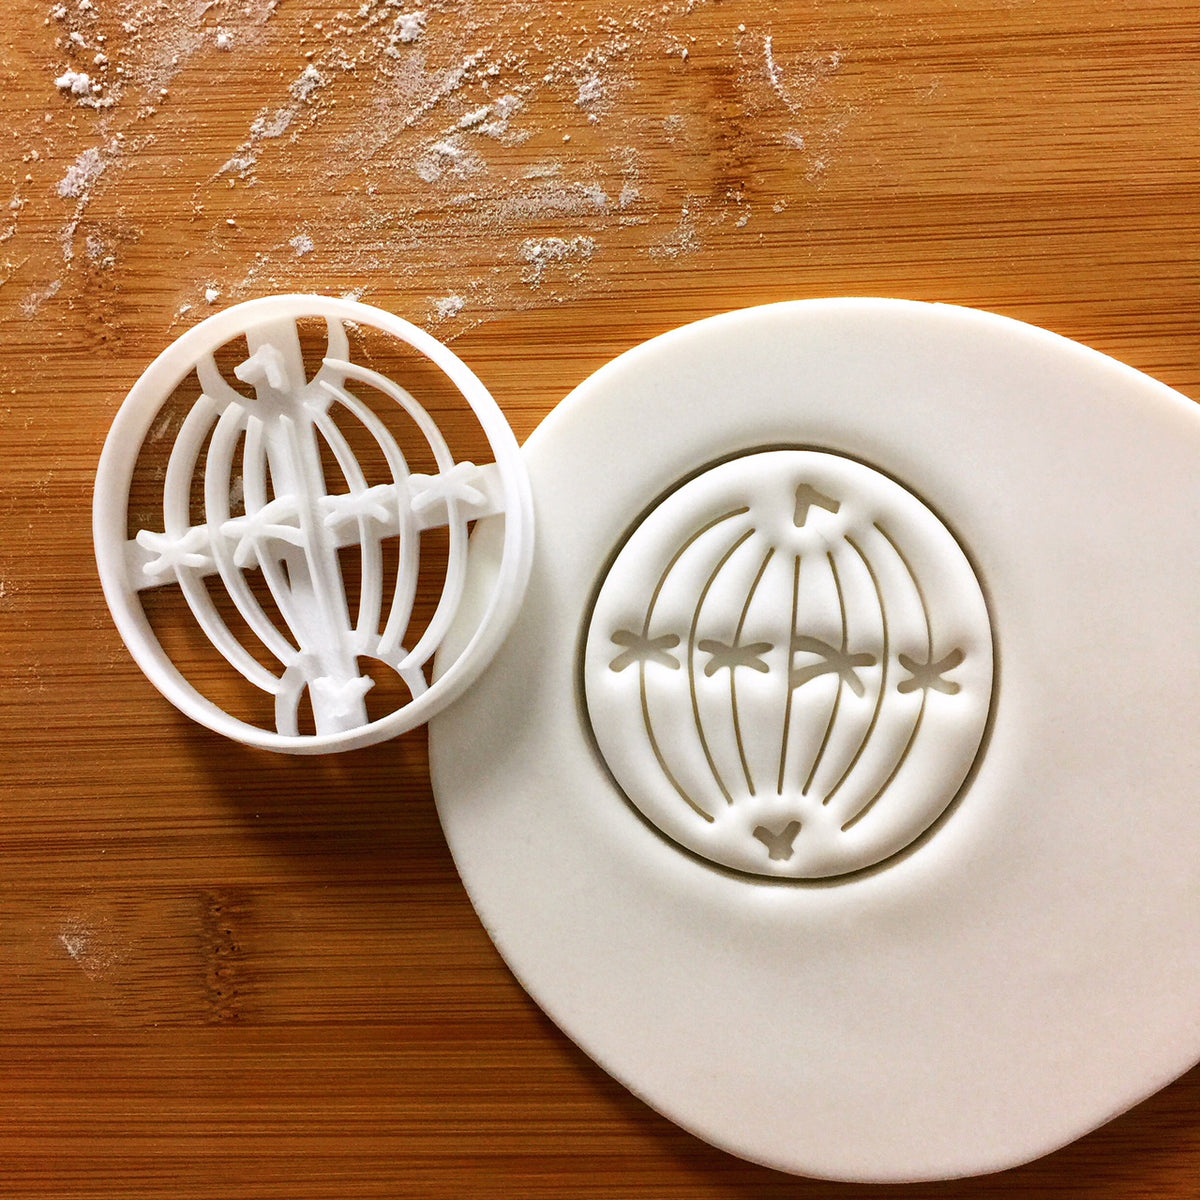 Metaphase Mitosis Cookie Cutter